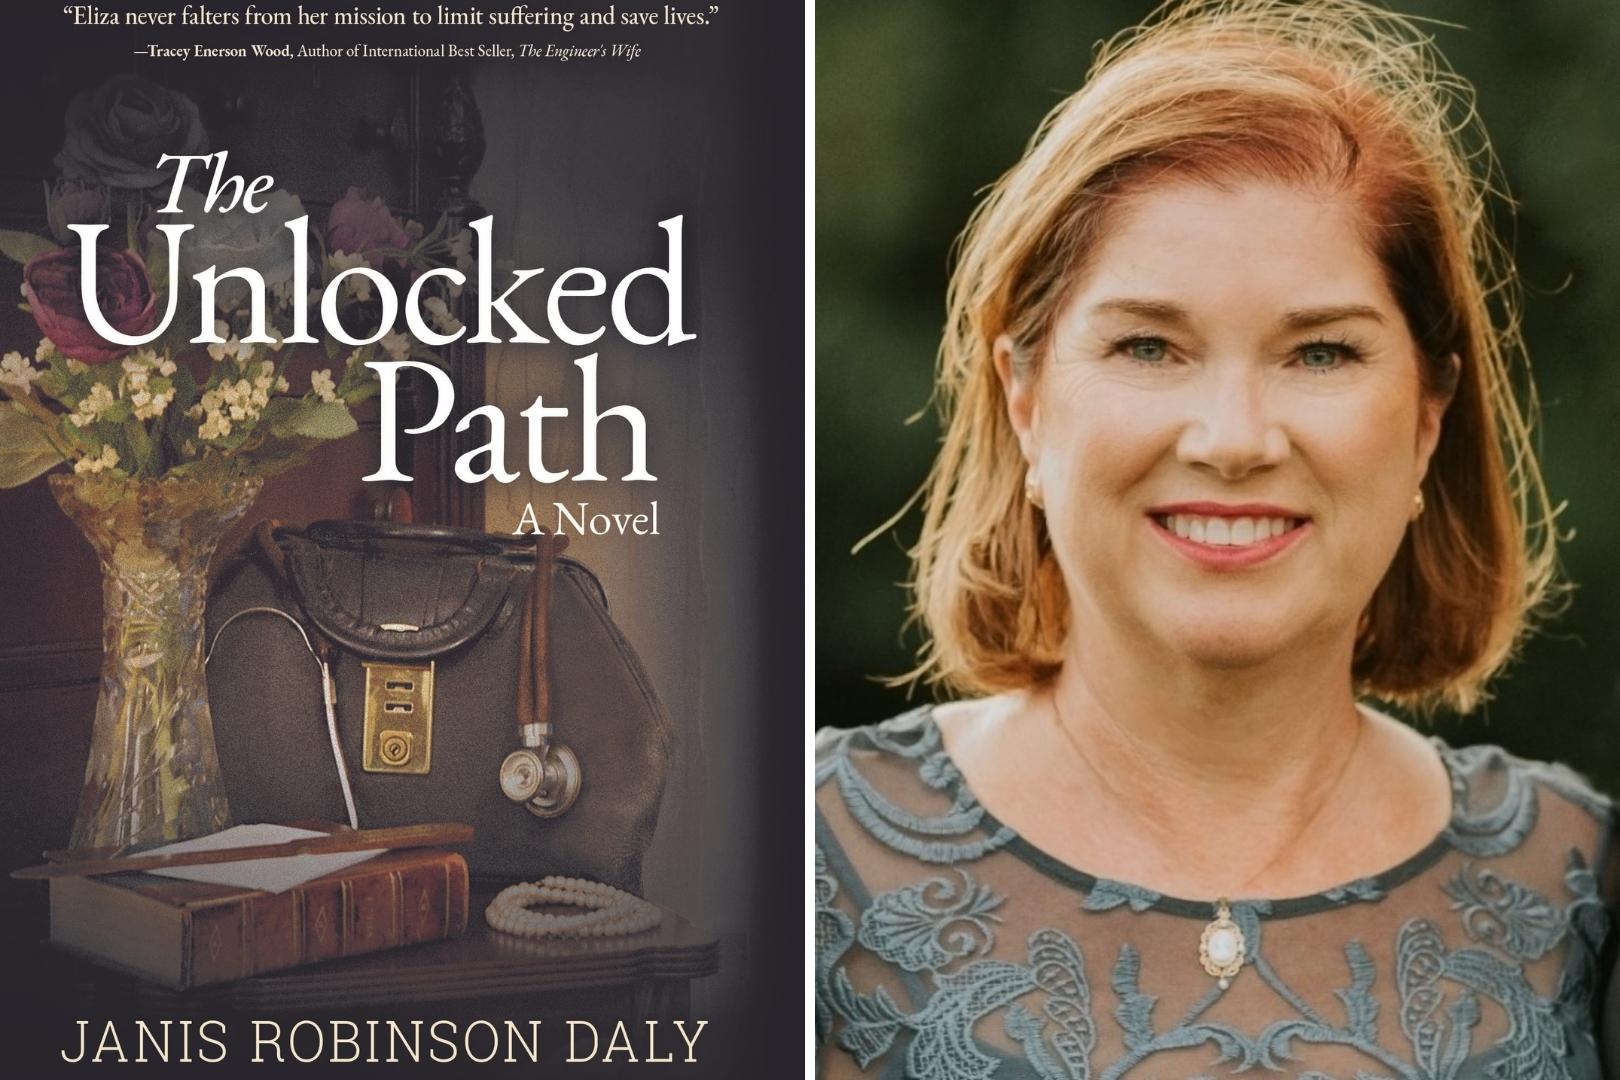 Q&A with Janis Robinson Daly, Author of The Unlocked Path